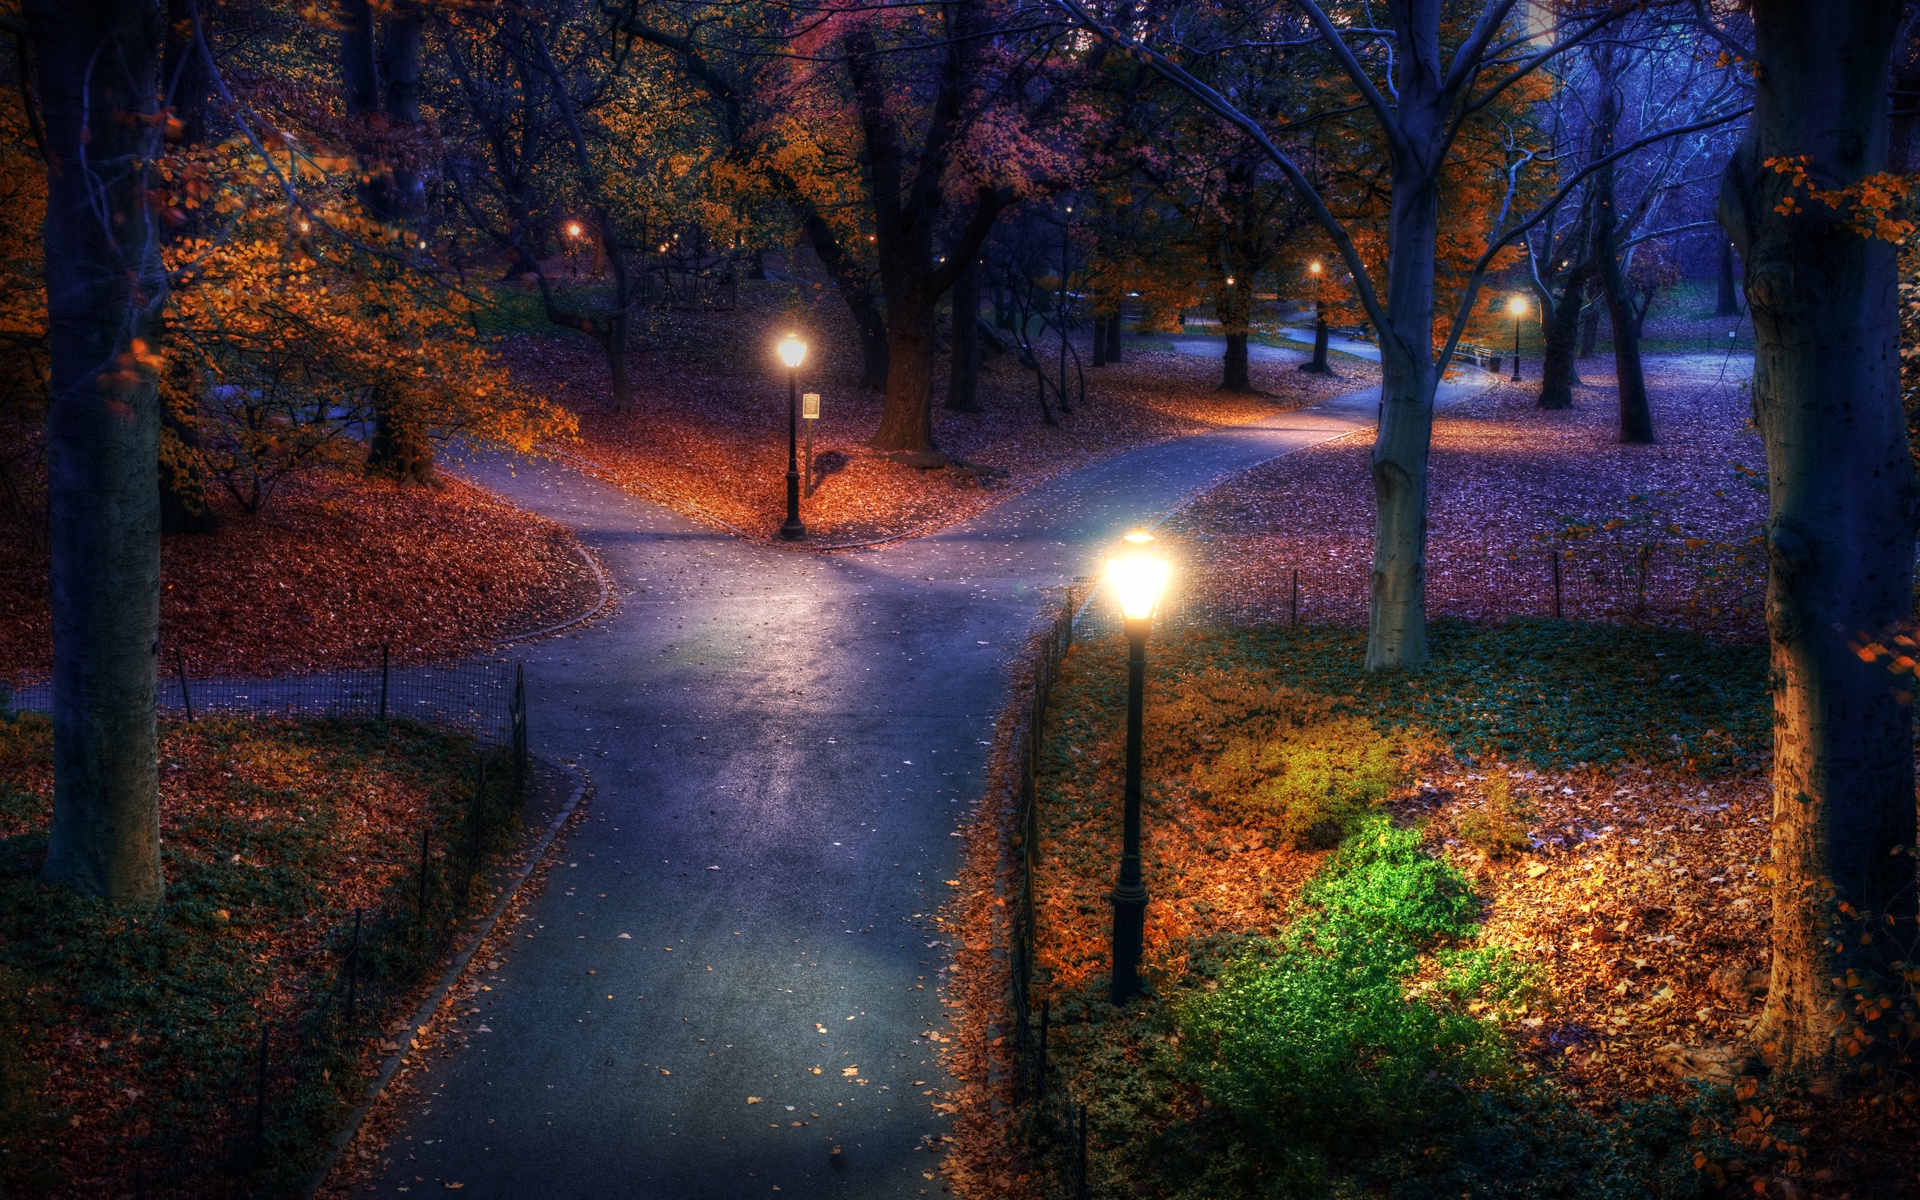 Park scenery with beautiful photography for desktop wallpaper.